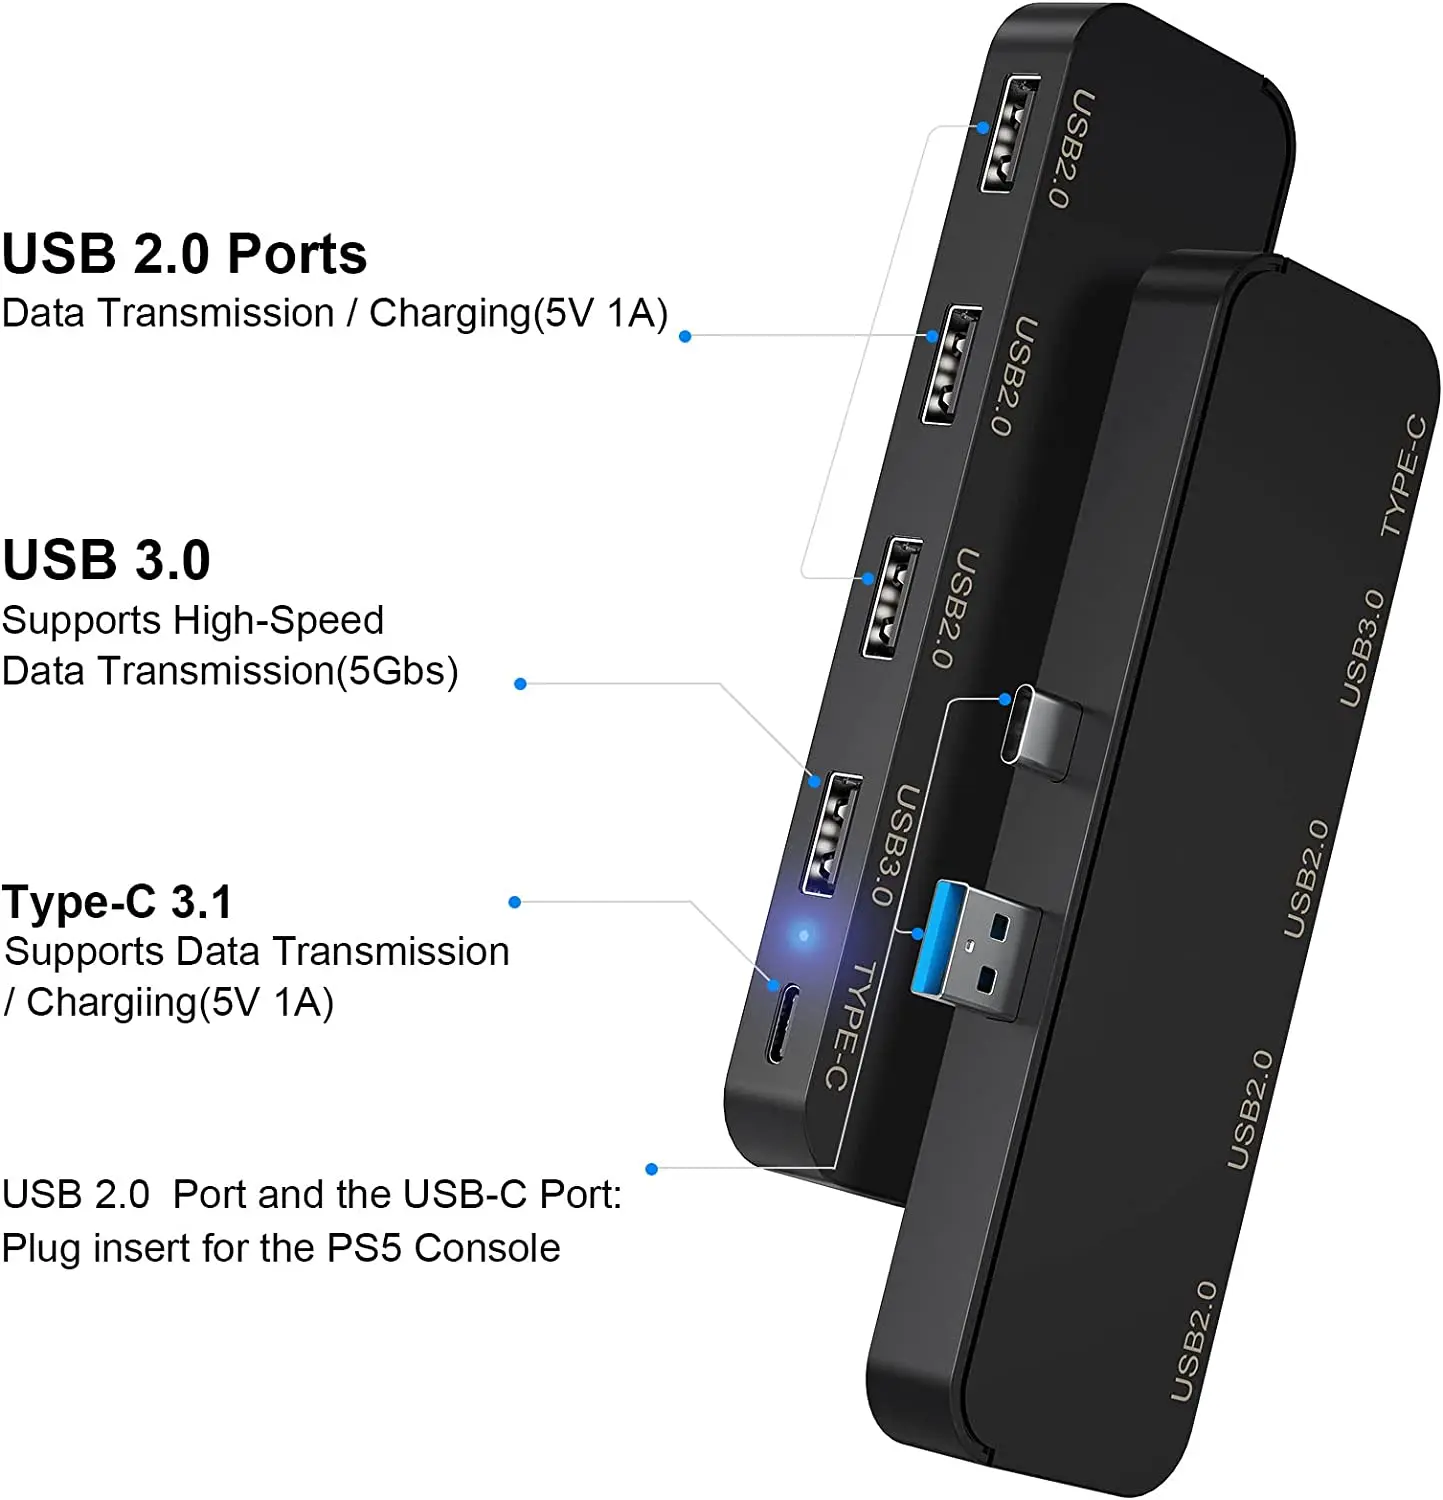 EEEkit 5 Ports USB Hub Fit for PS5 Console, High-Speed Expansion USB Hub  Charger Adapter with Type-C Compatible with Playstation 5 Gaming Console,  Expands Game Console Ports 